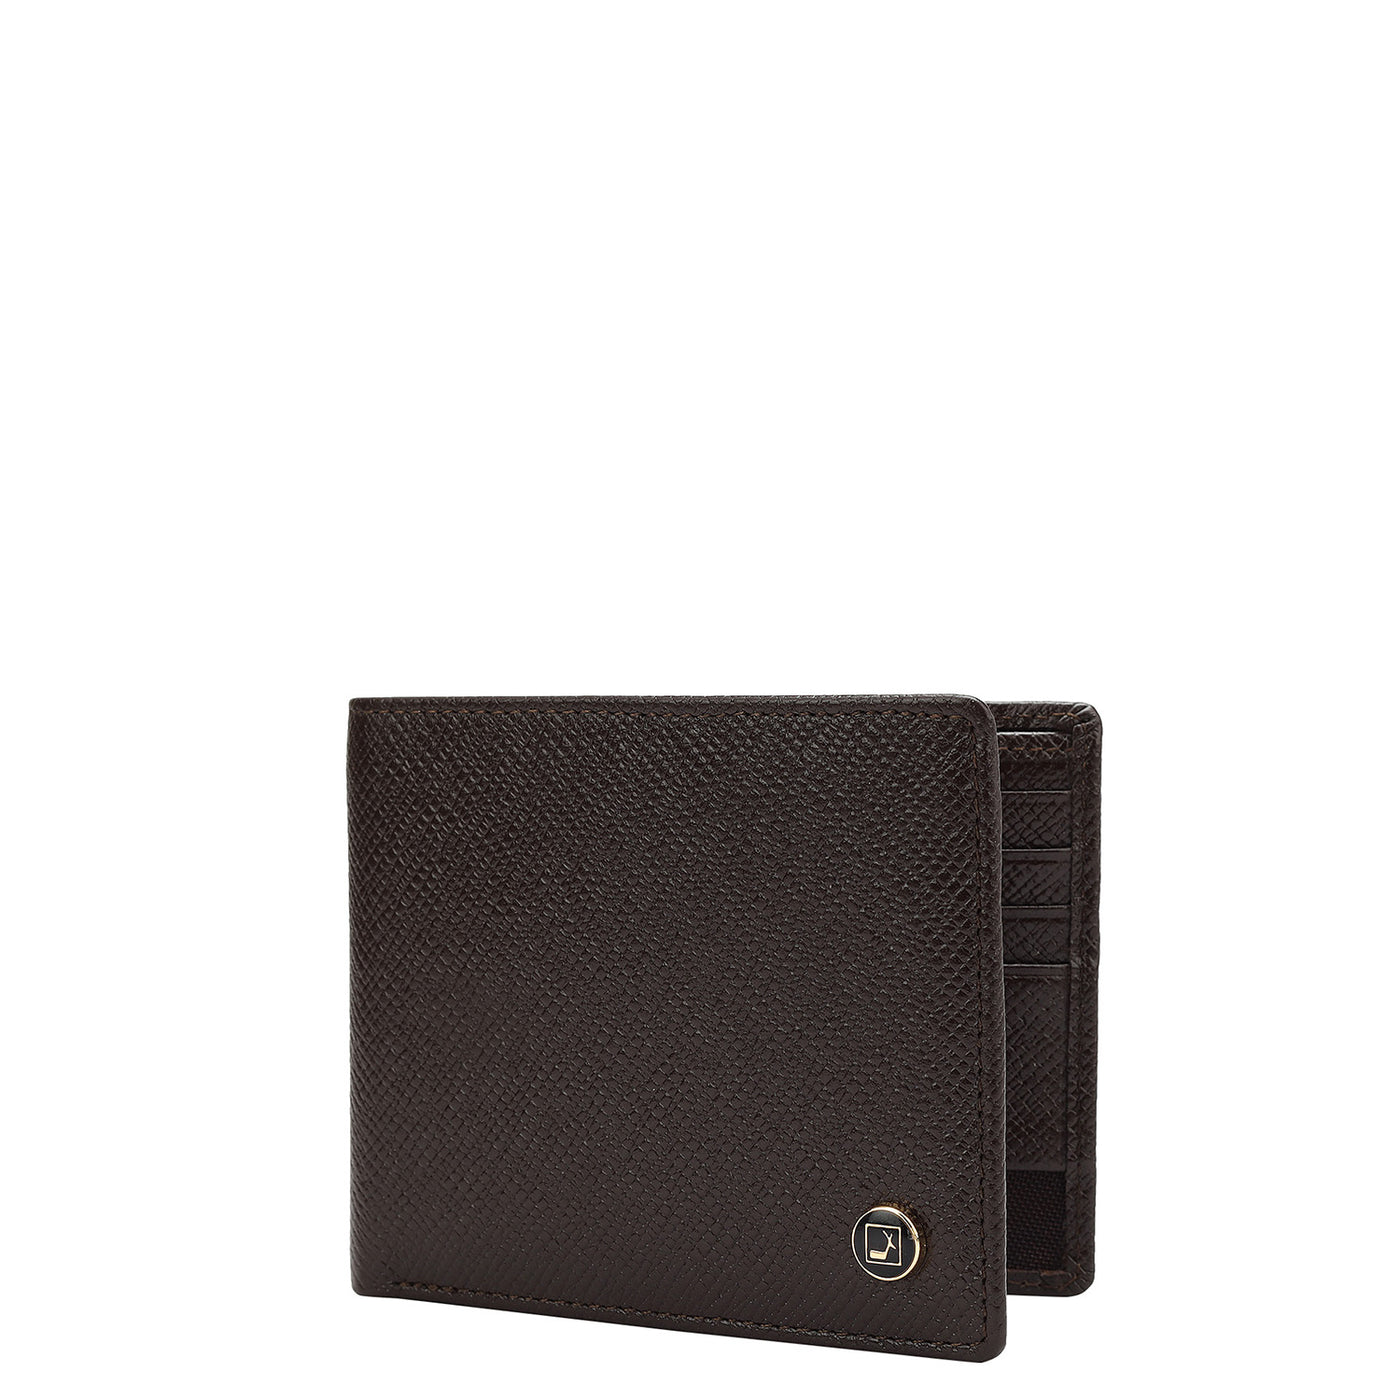 Franzy Leather Mens Wallet - Chocolate